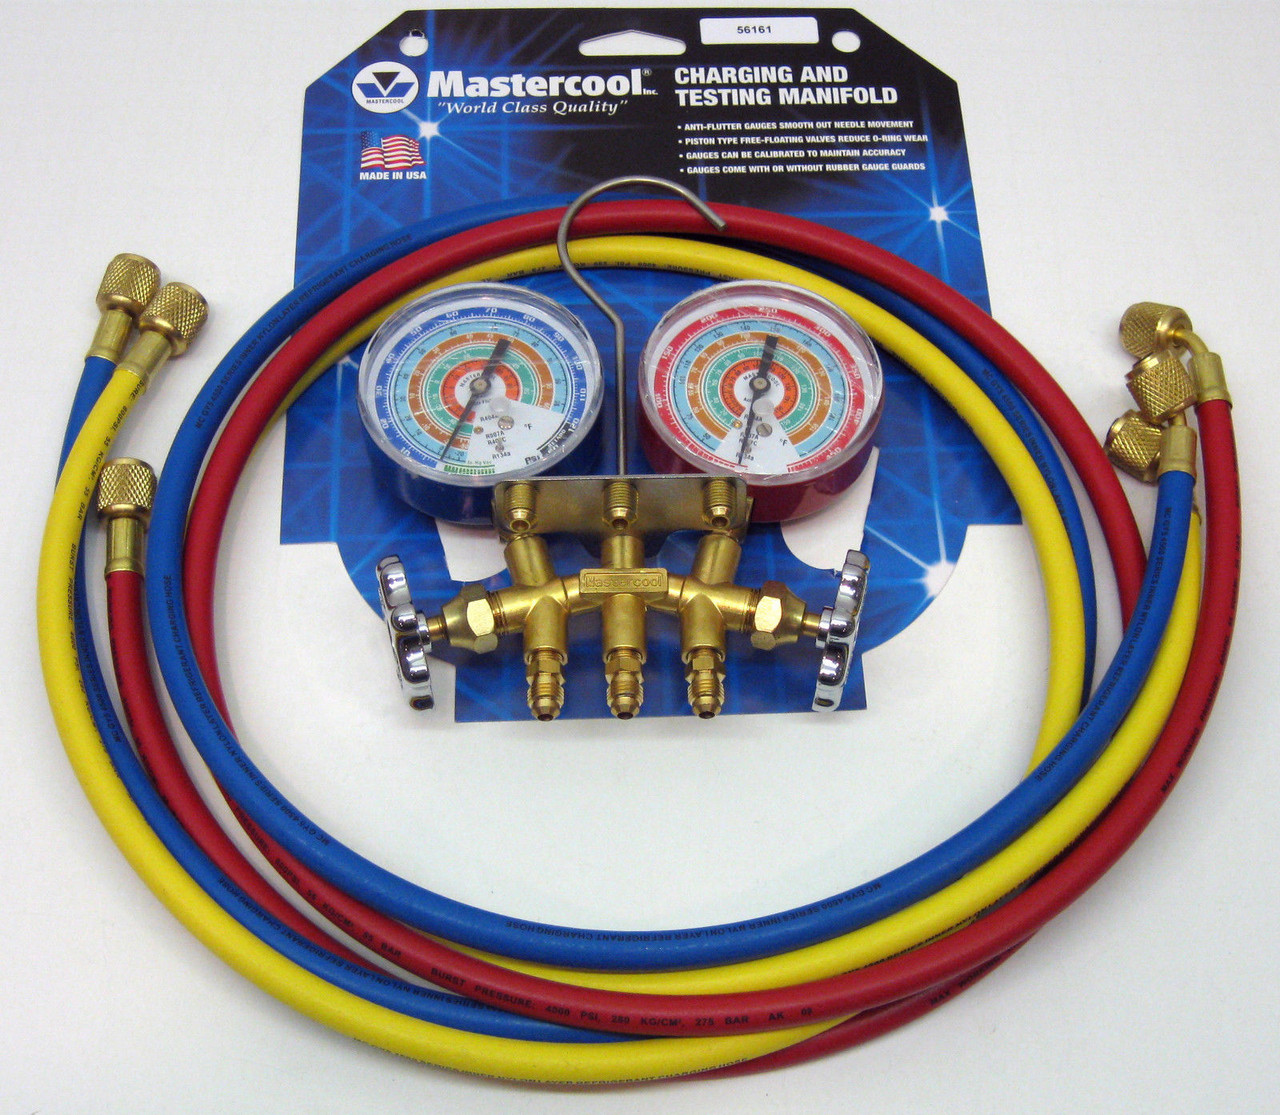 Mastercool Inc., Manufacturer of Air Conditioning, Refrigeration